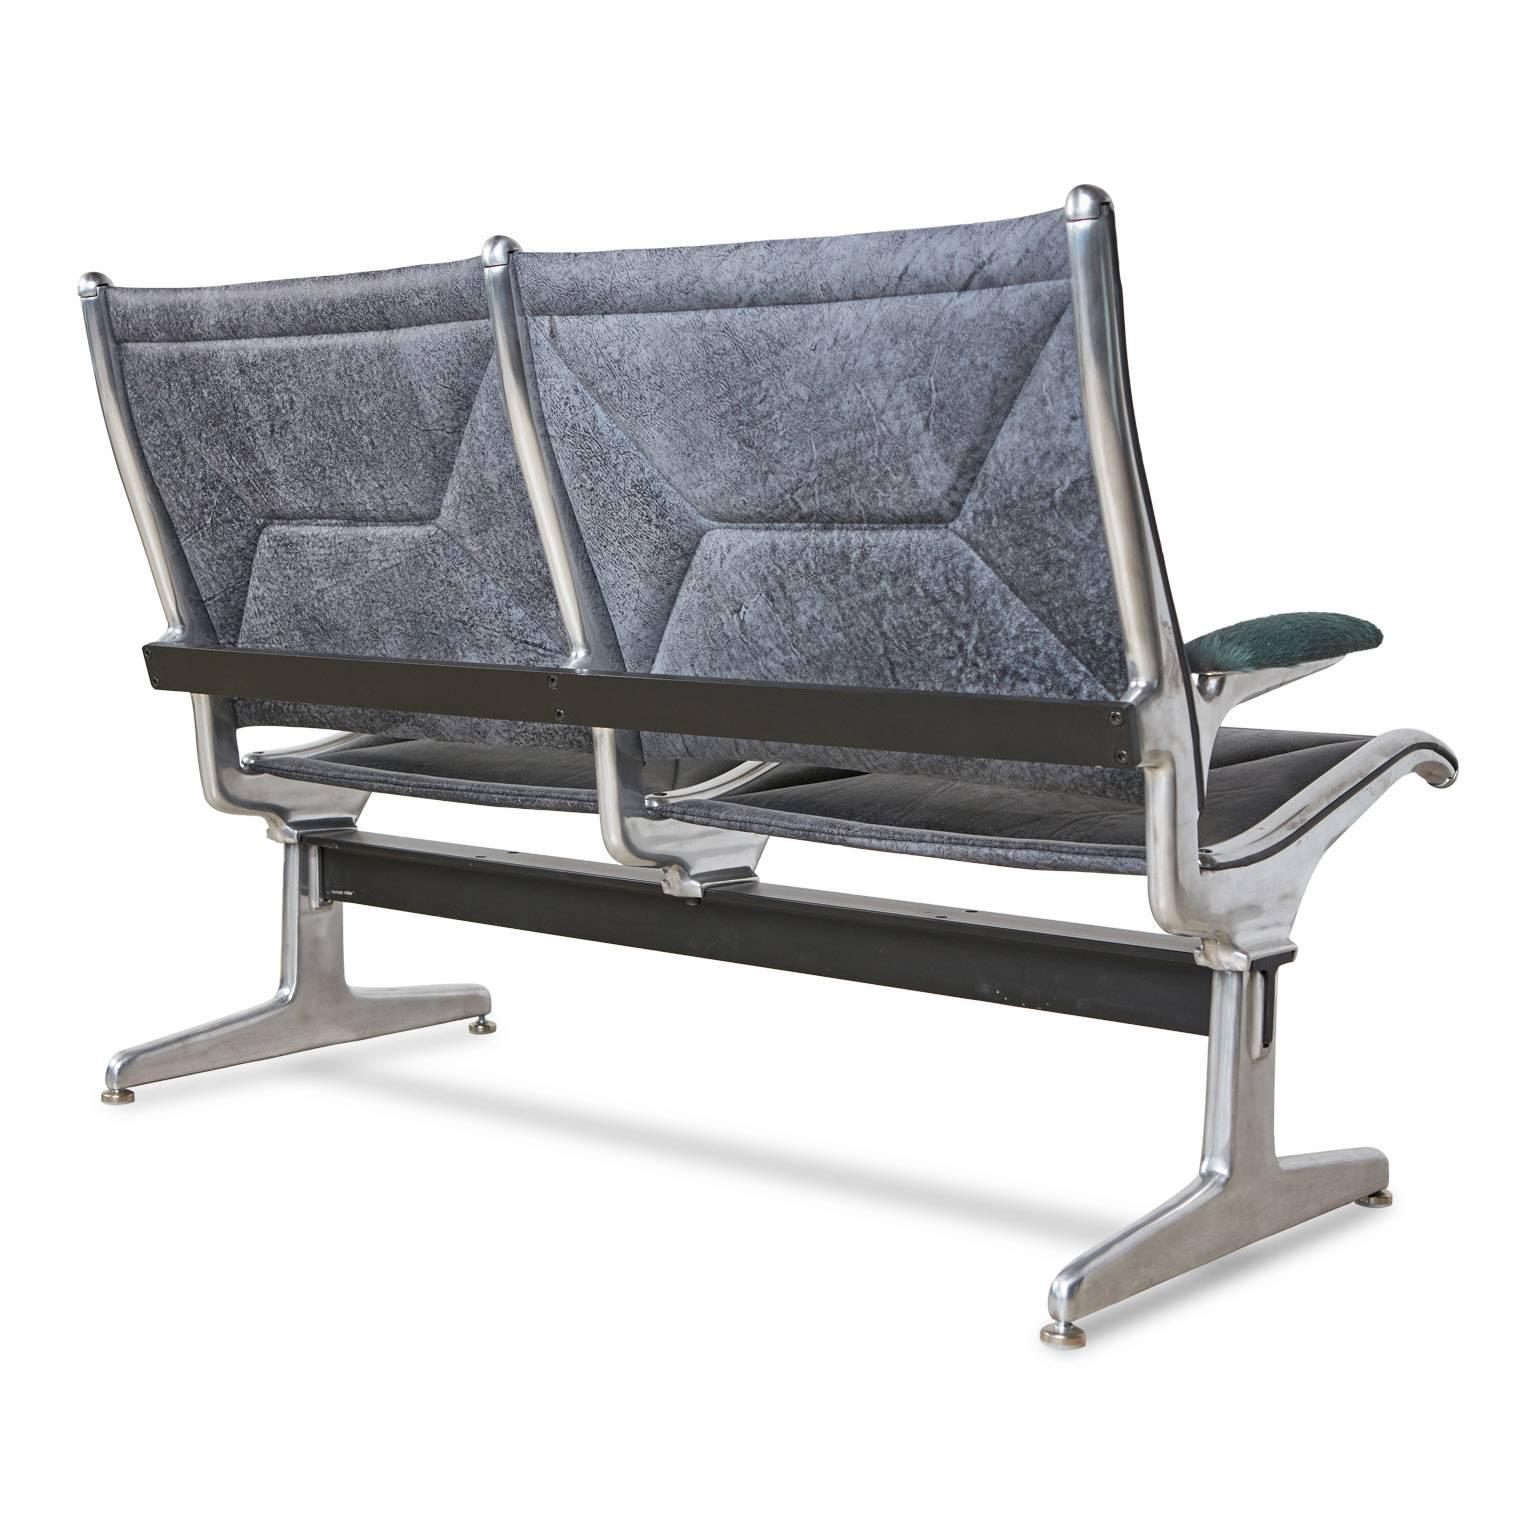 American Tandem Sling by Eames for Herman Miller, Restored in Edelman Leather, circa 1962